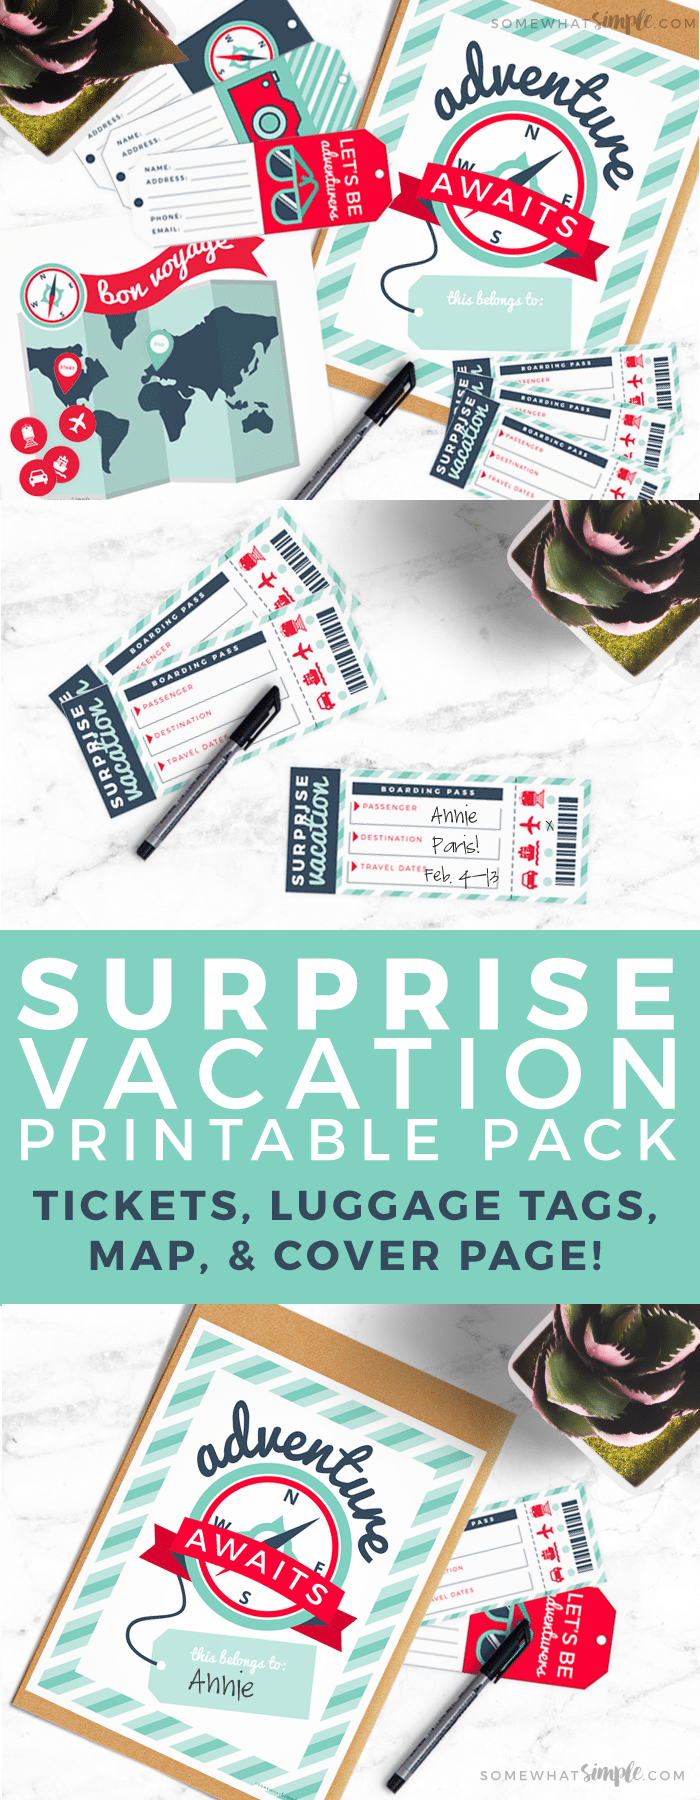 surprise-vacation-reveal-printables-somewhat-simple